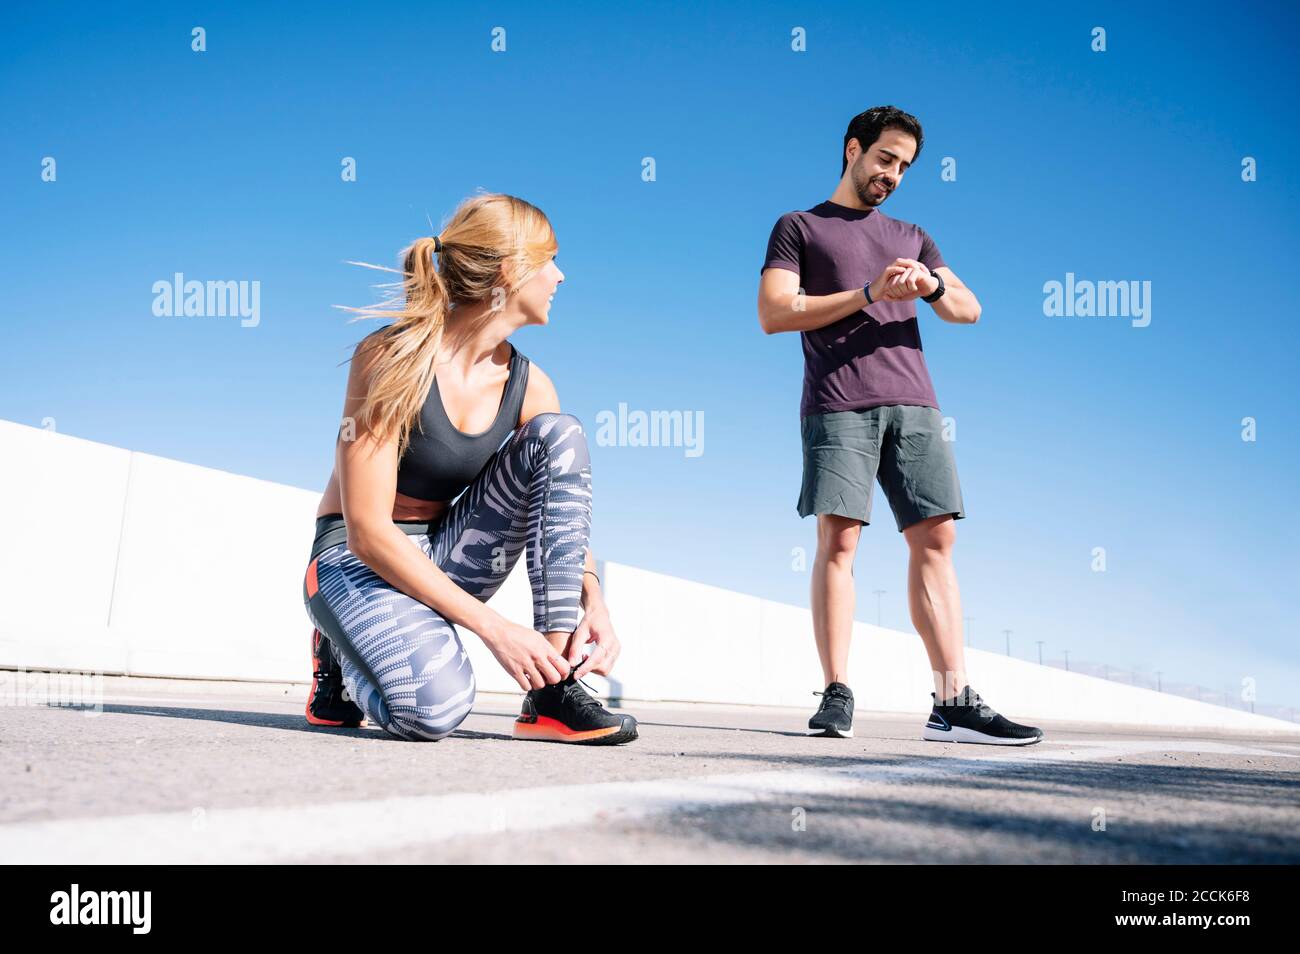 man checking time while woman tying shoelace on road against clear blue sky in city Stock Photo